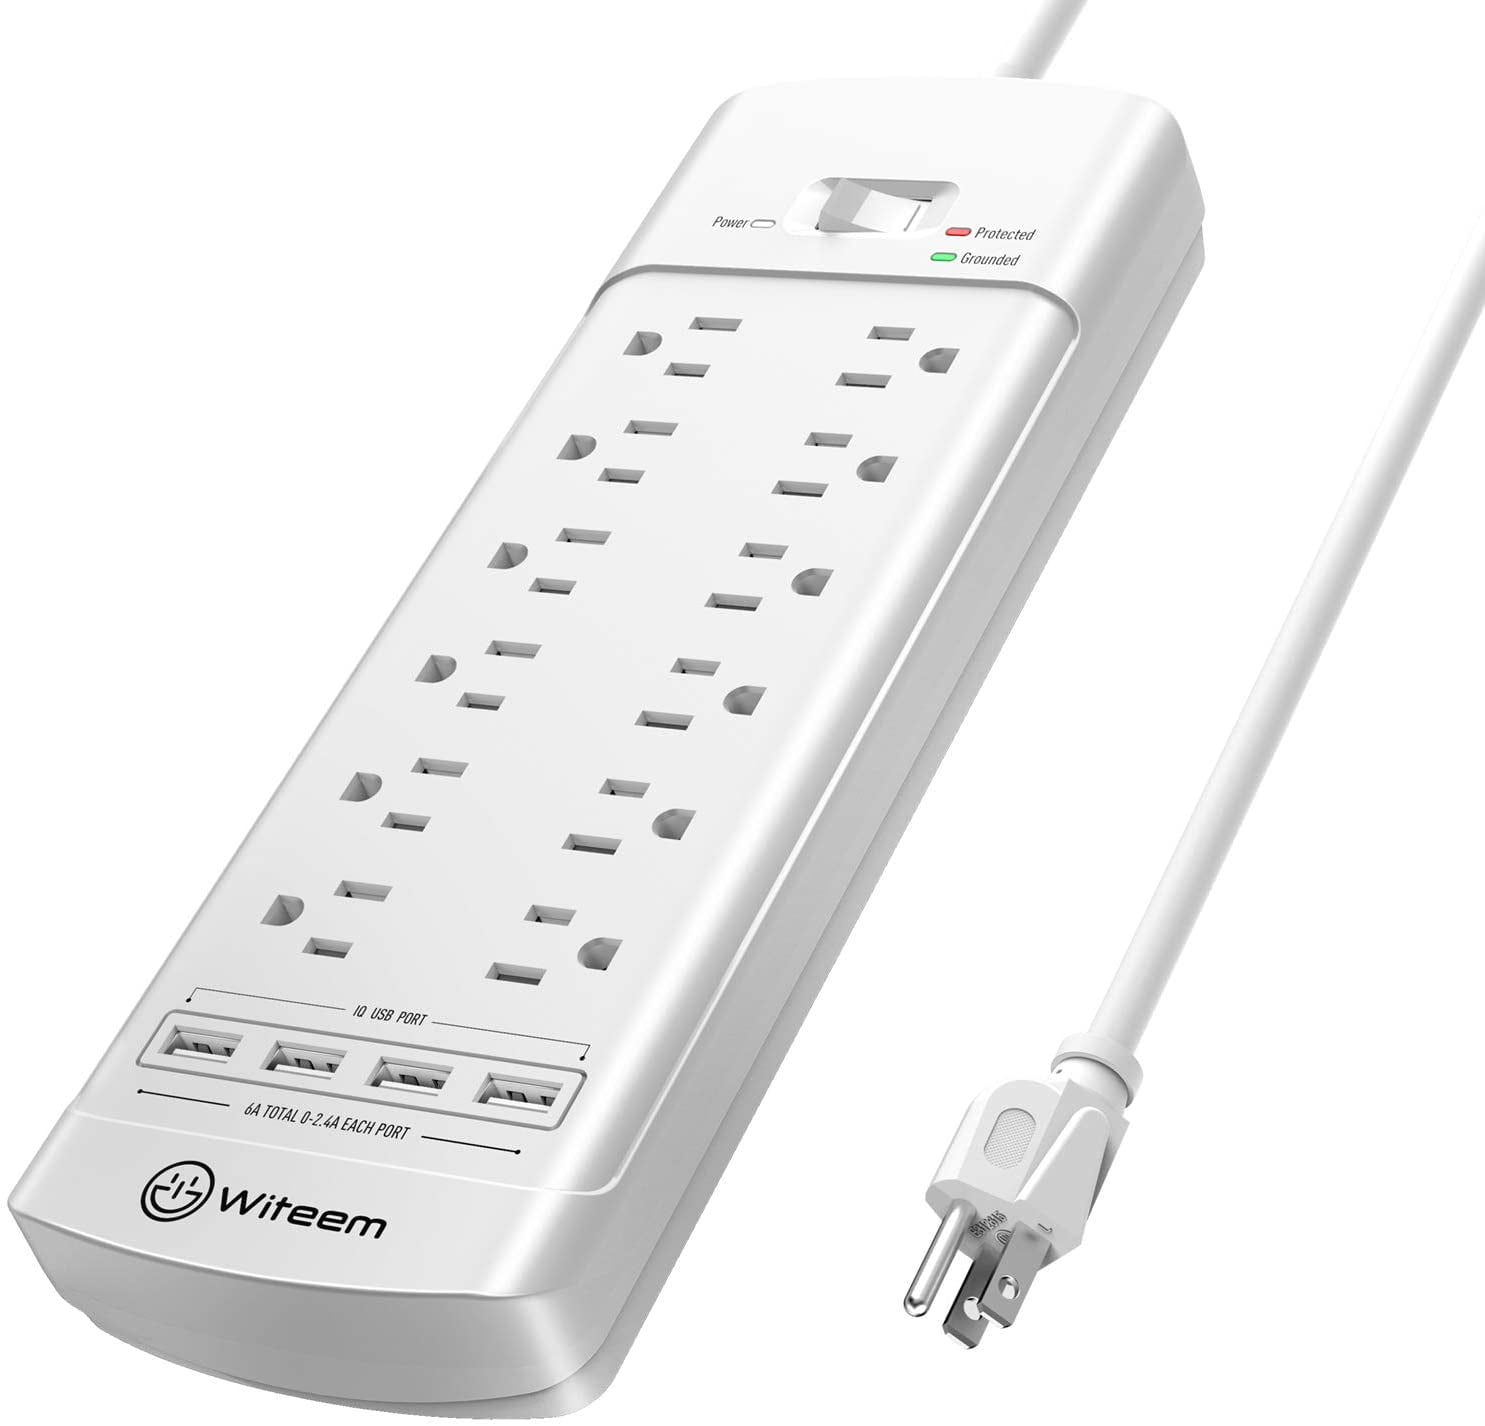 White Witeem Surge Protector Smart Power Strip with 4 USB Charging Ports 6 Power Outlets 6 Foot Power Cord 